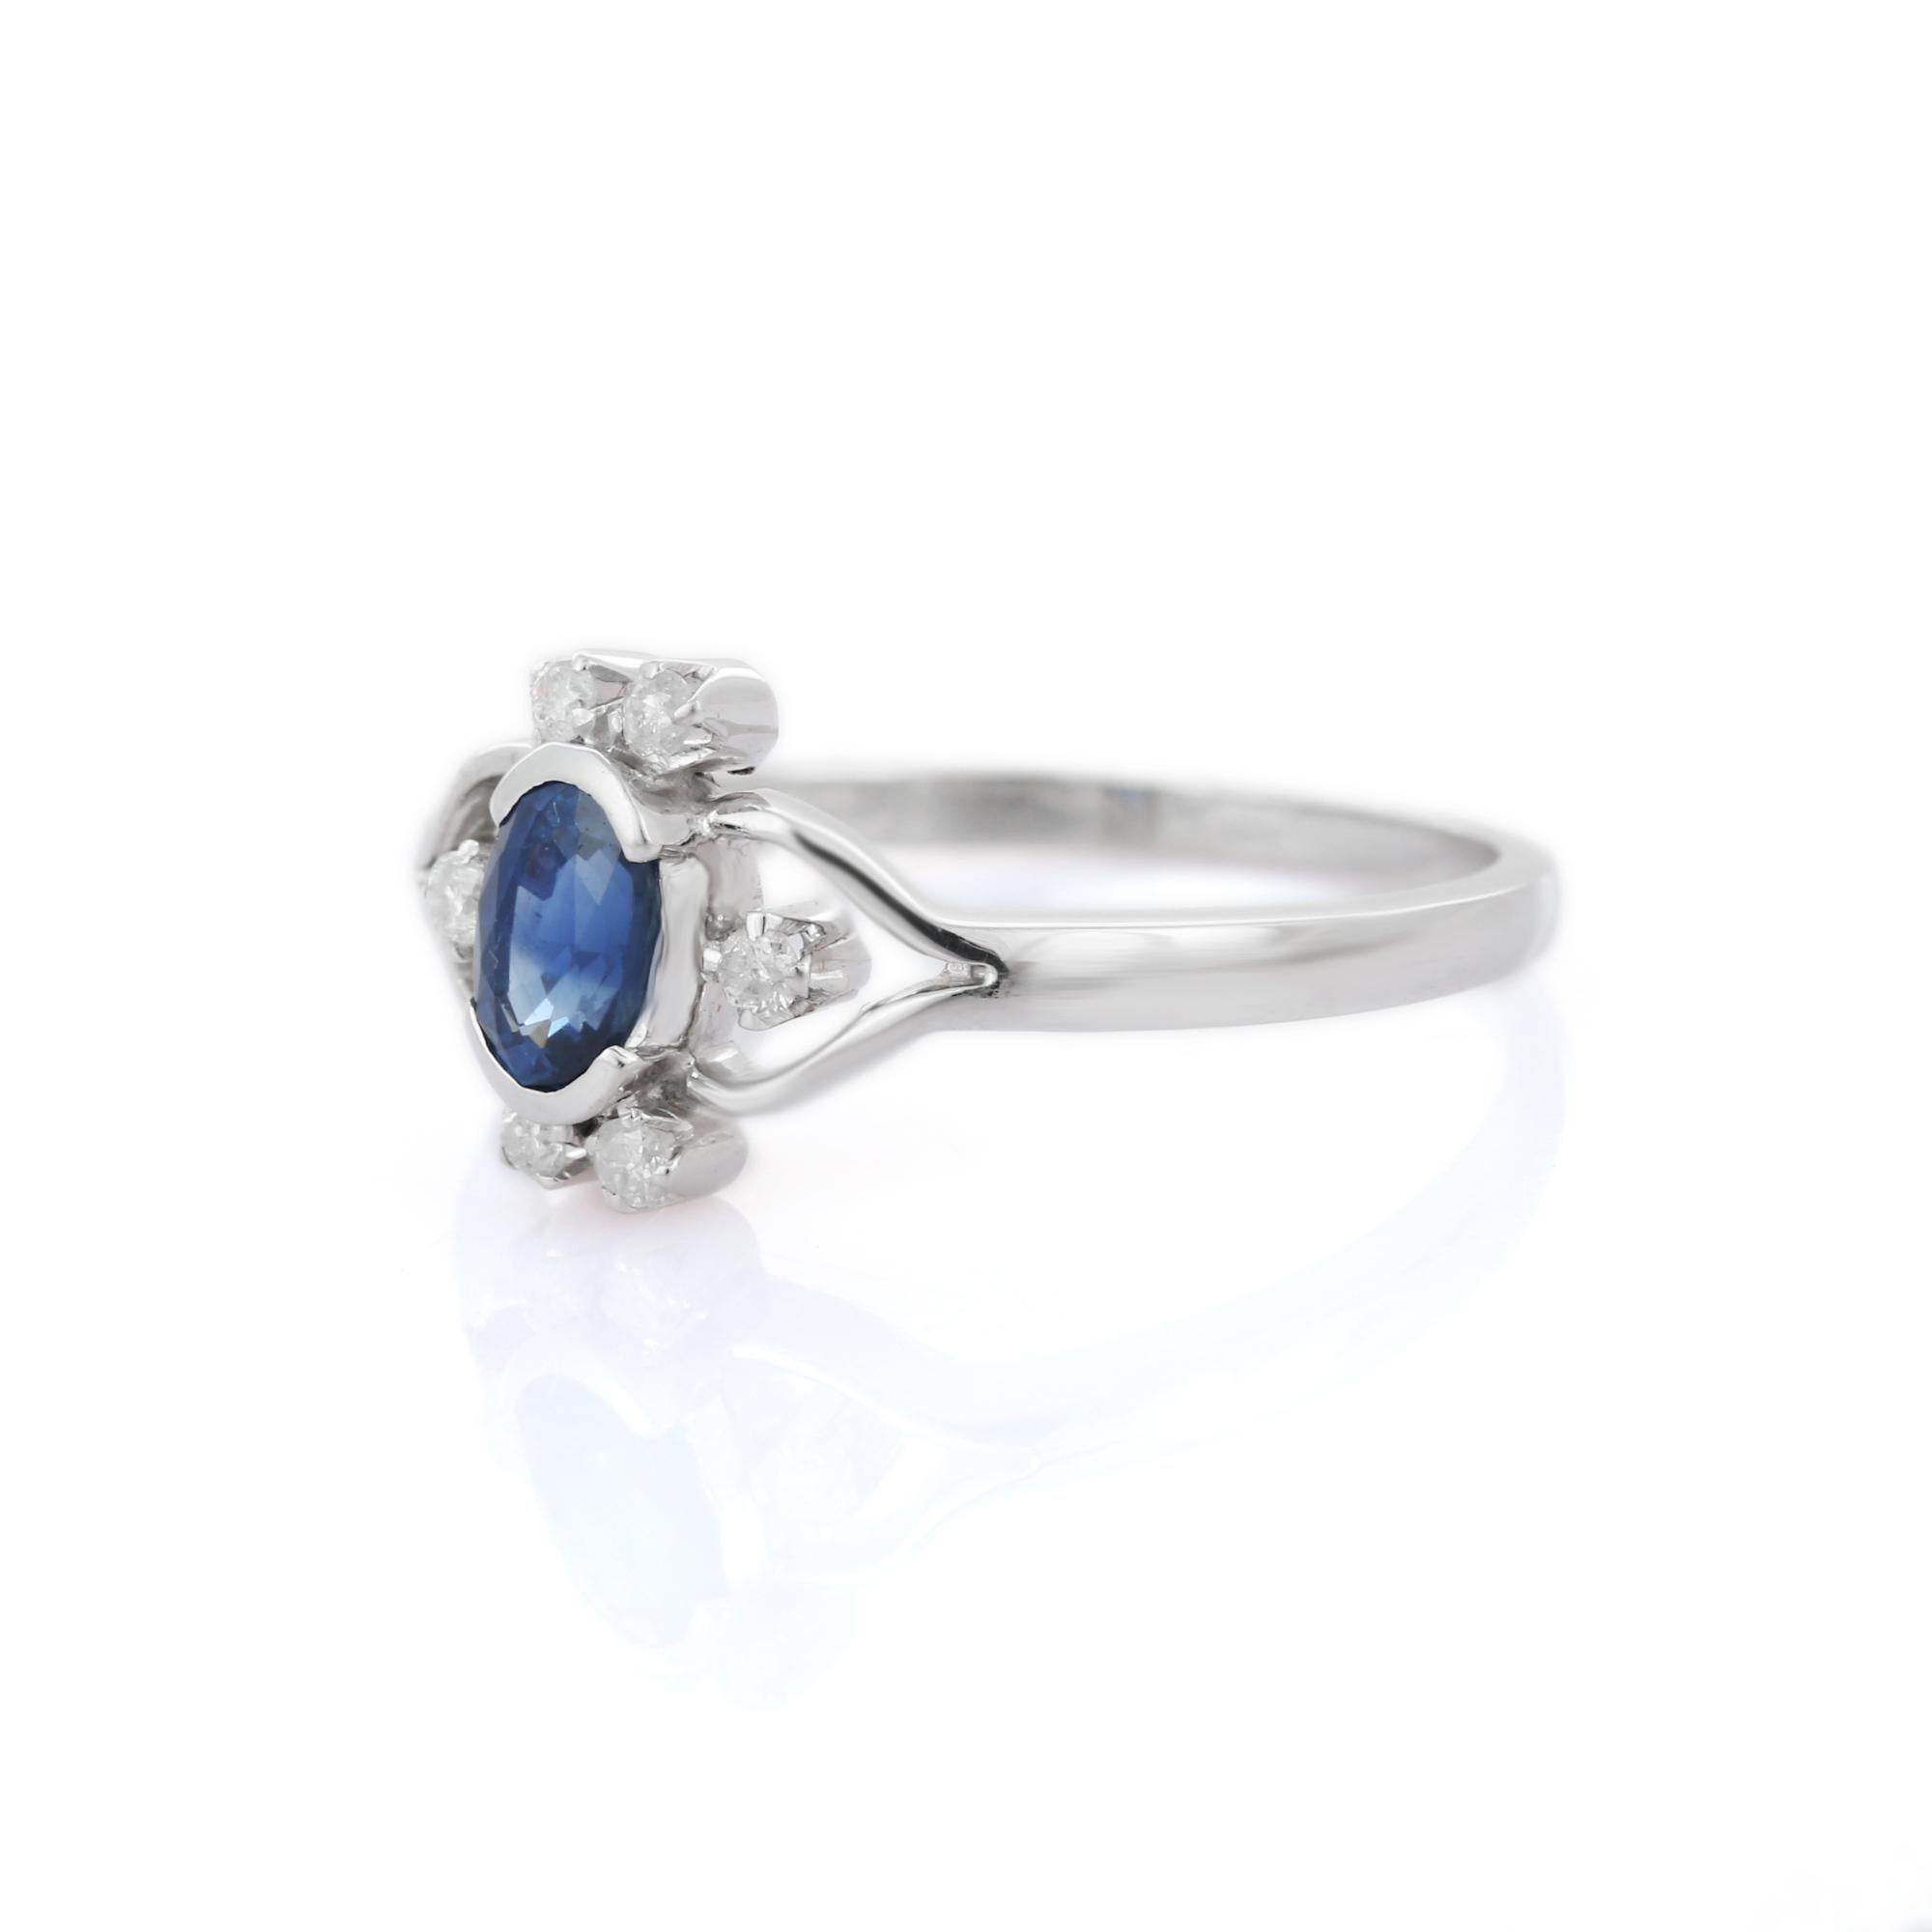 For Sale:  Solid 18k White Gold Vivid Oval Blue Sapphire and Diamond Wedding Ring 3